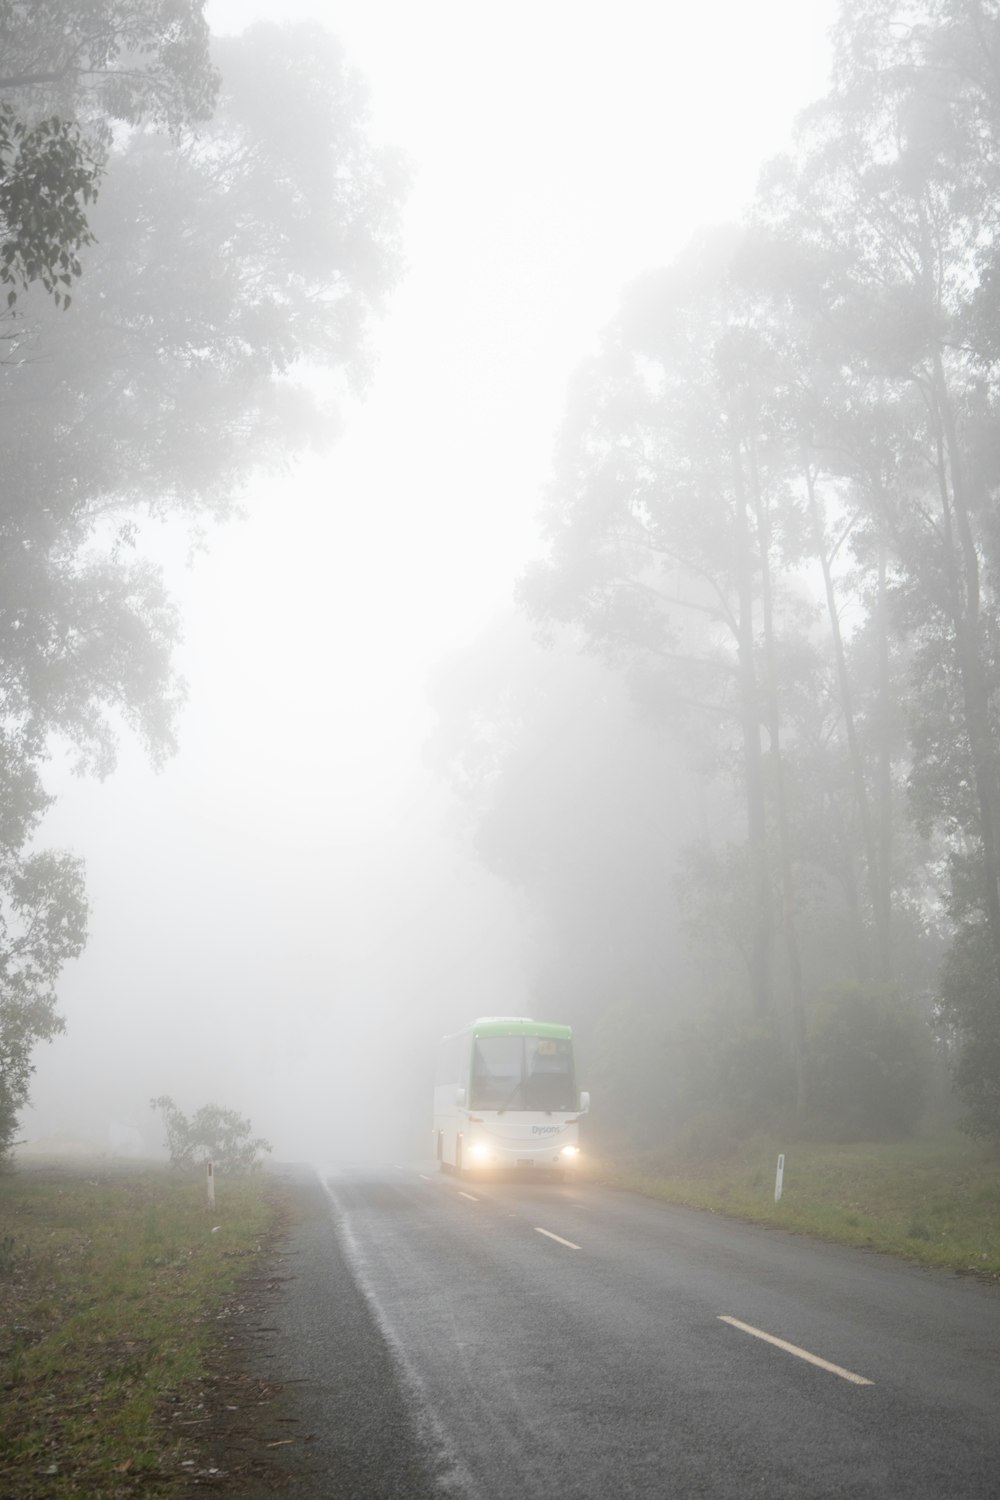 white van on road during foggy weather